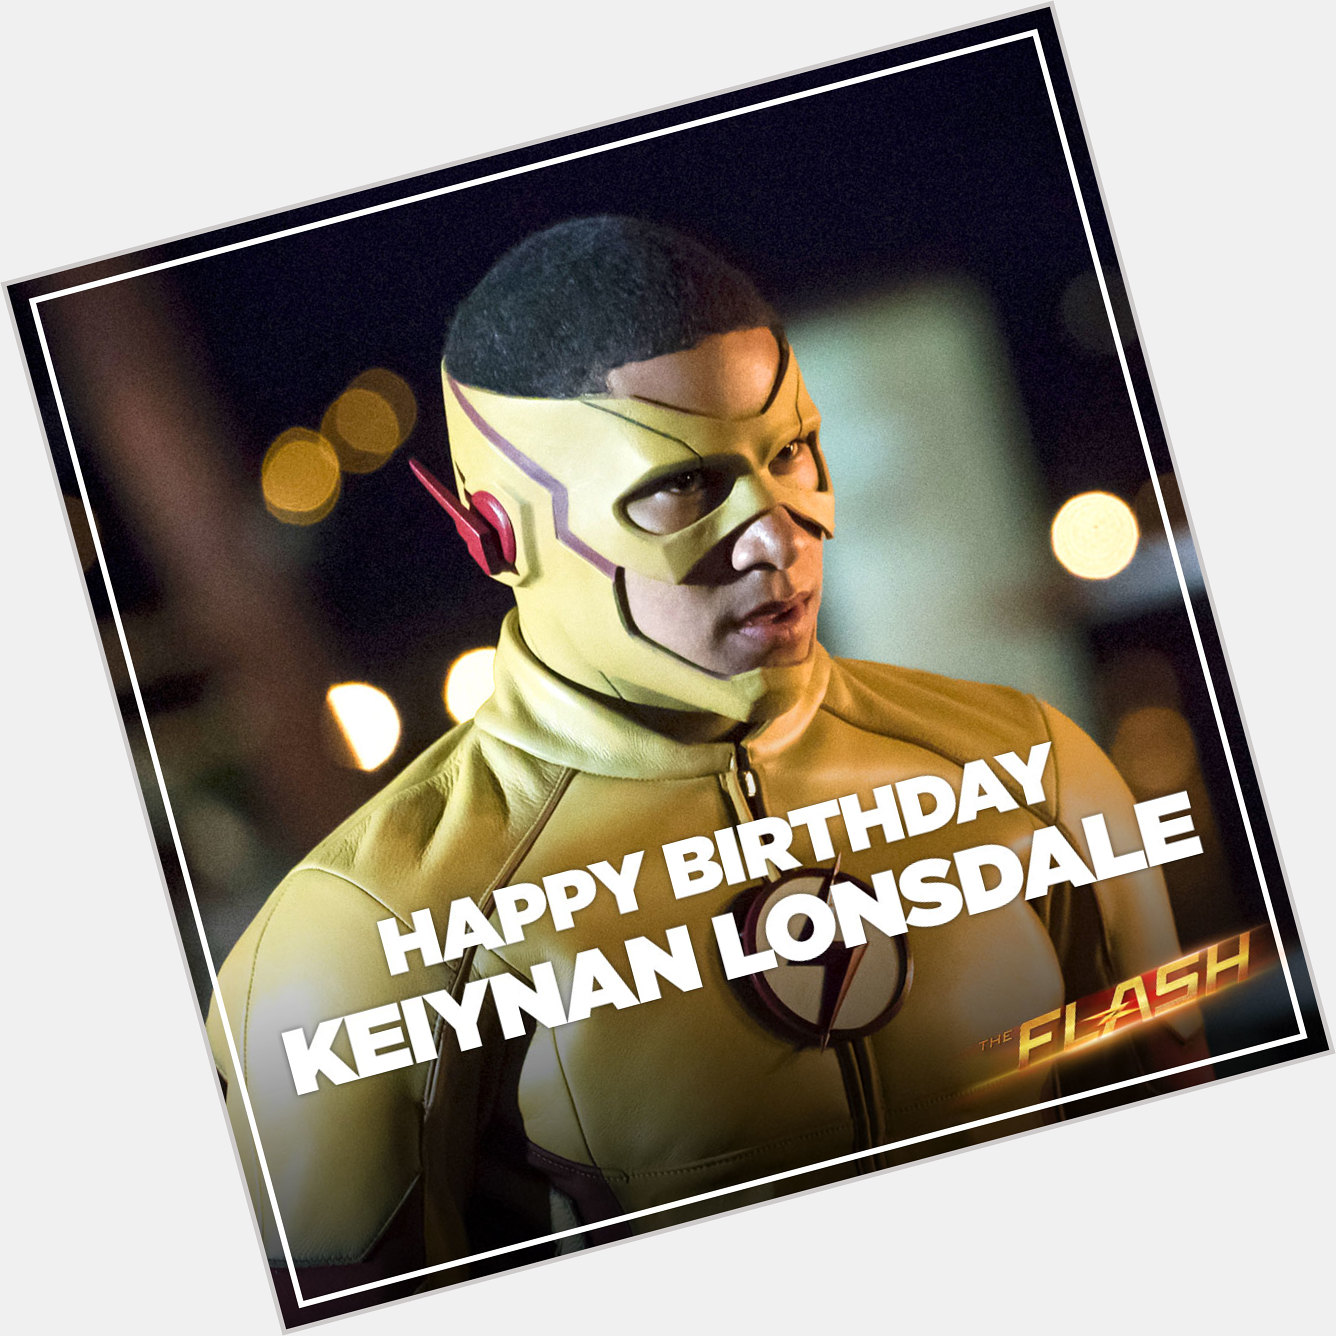 Happy Birthday to Keiynan Lonsdale to show him some love! 